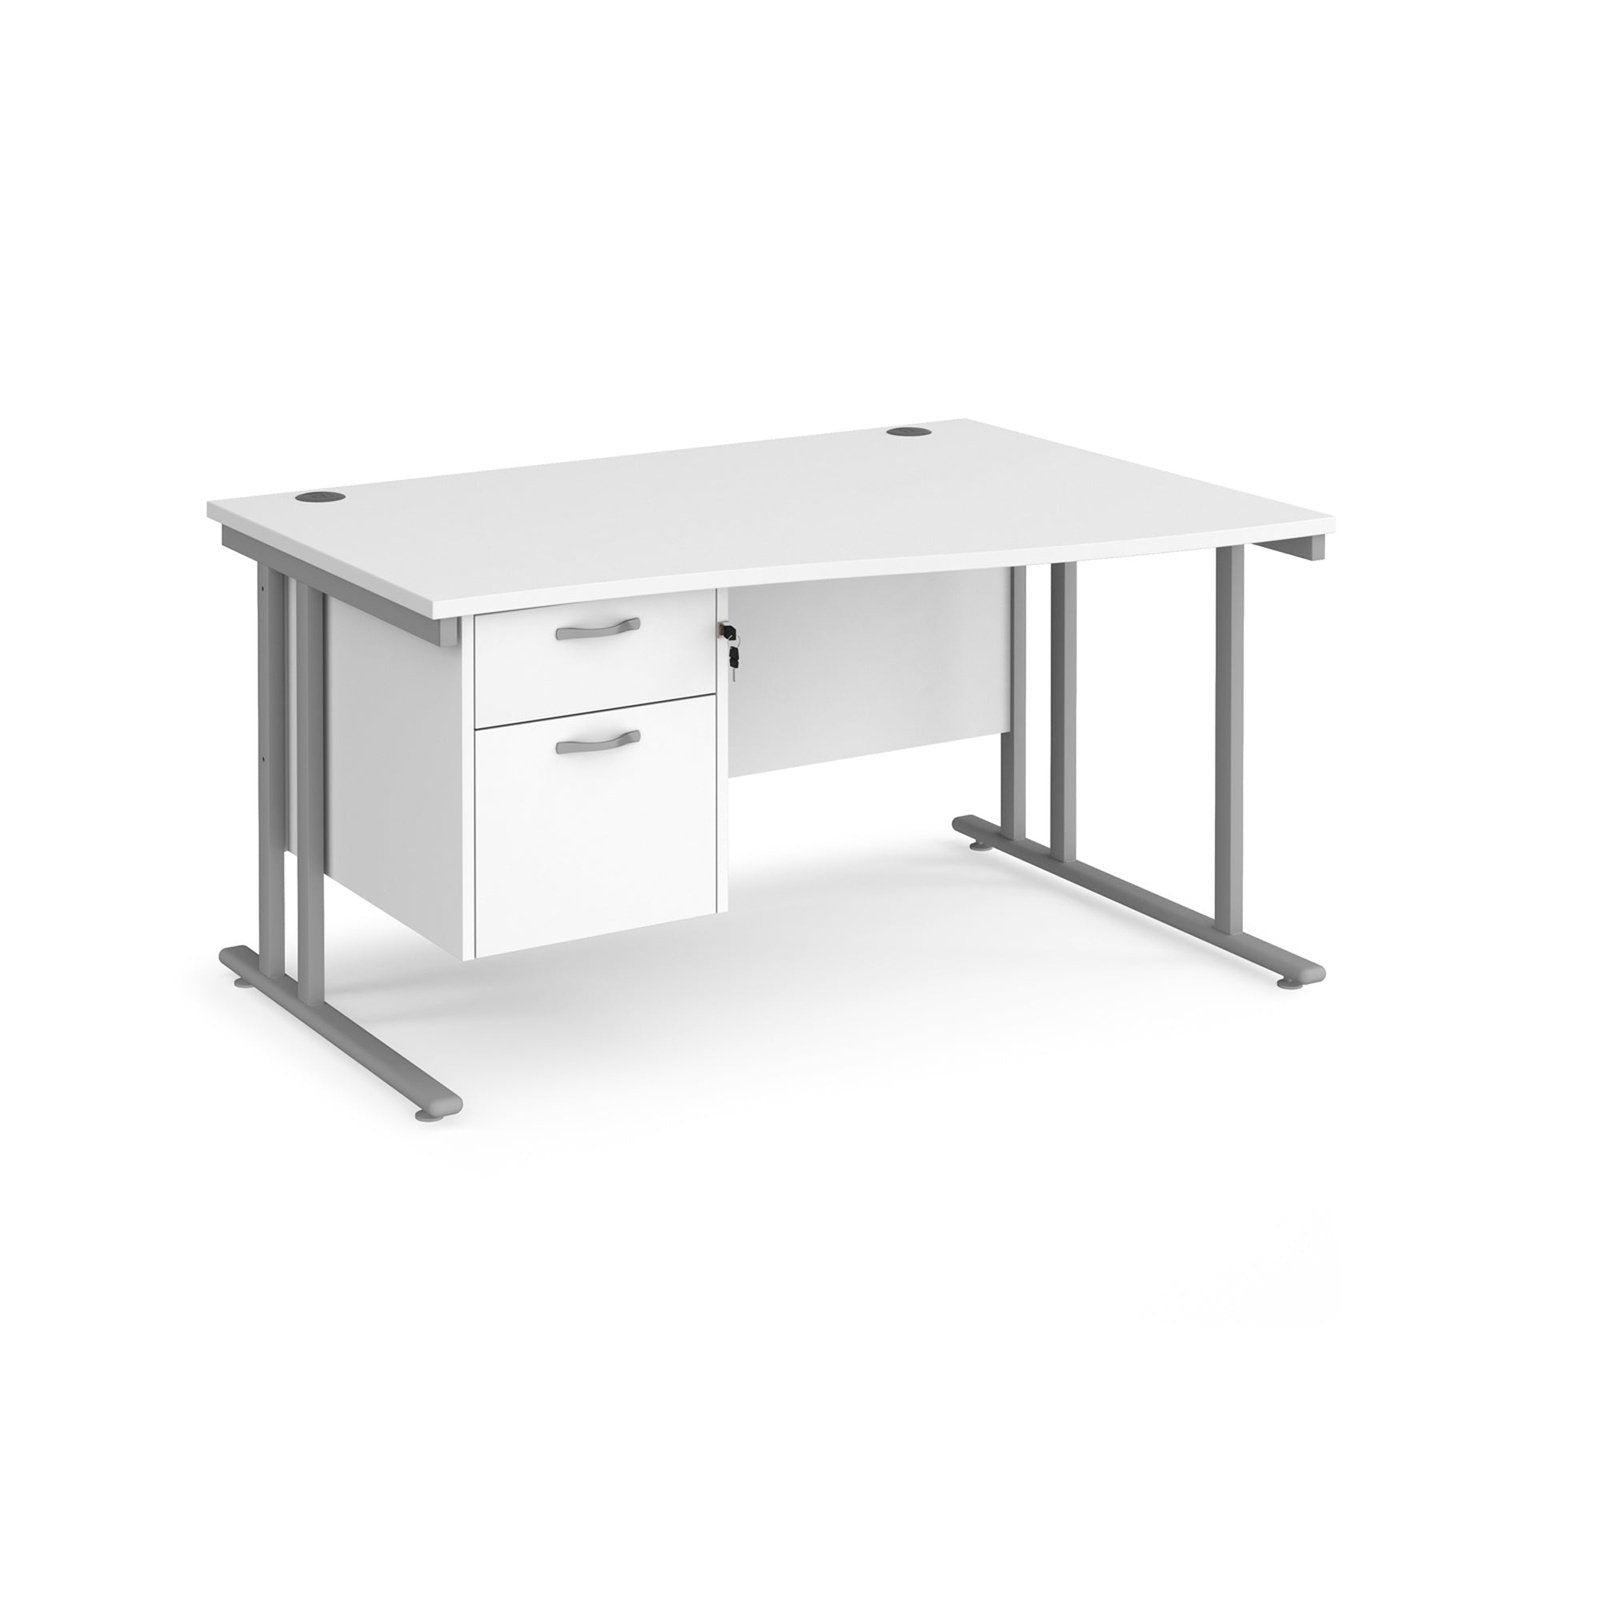 Maestro 25 cantilever leg right hand with 2 drawer pedestal - Office Products Online